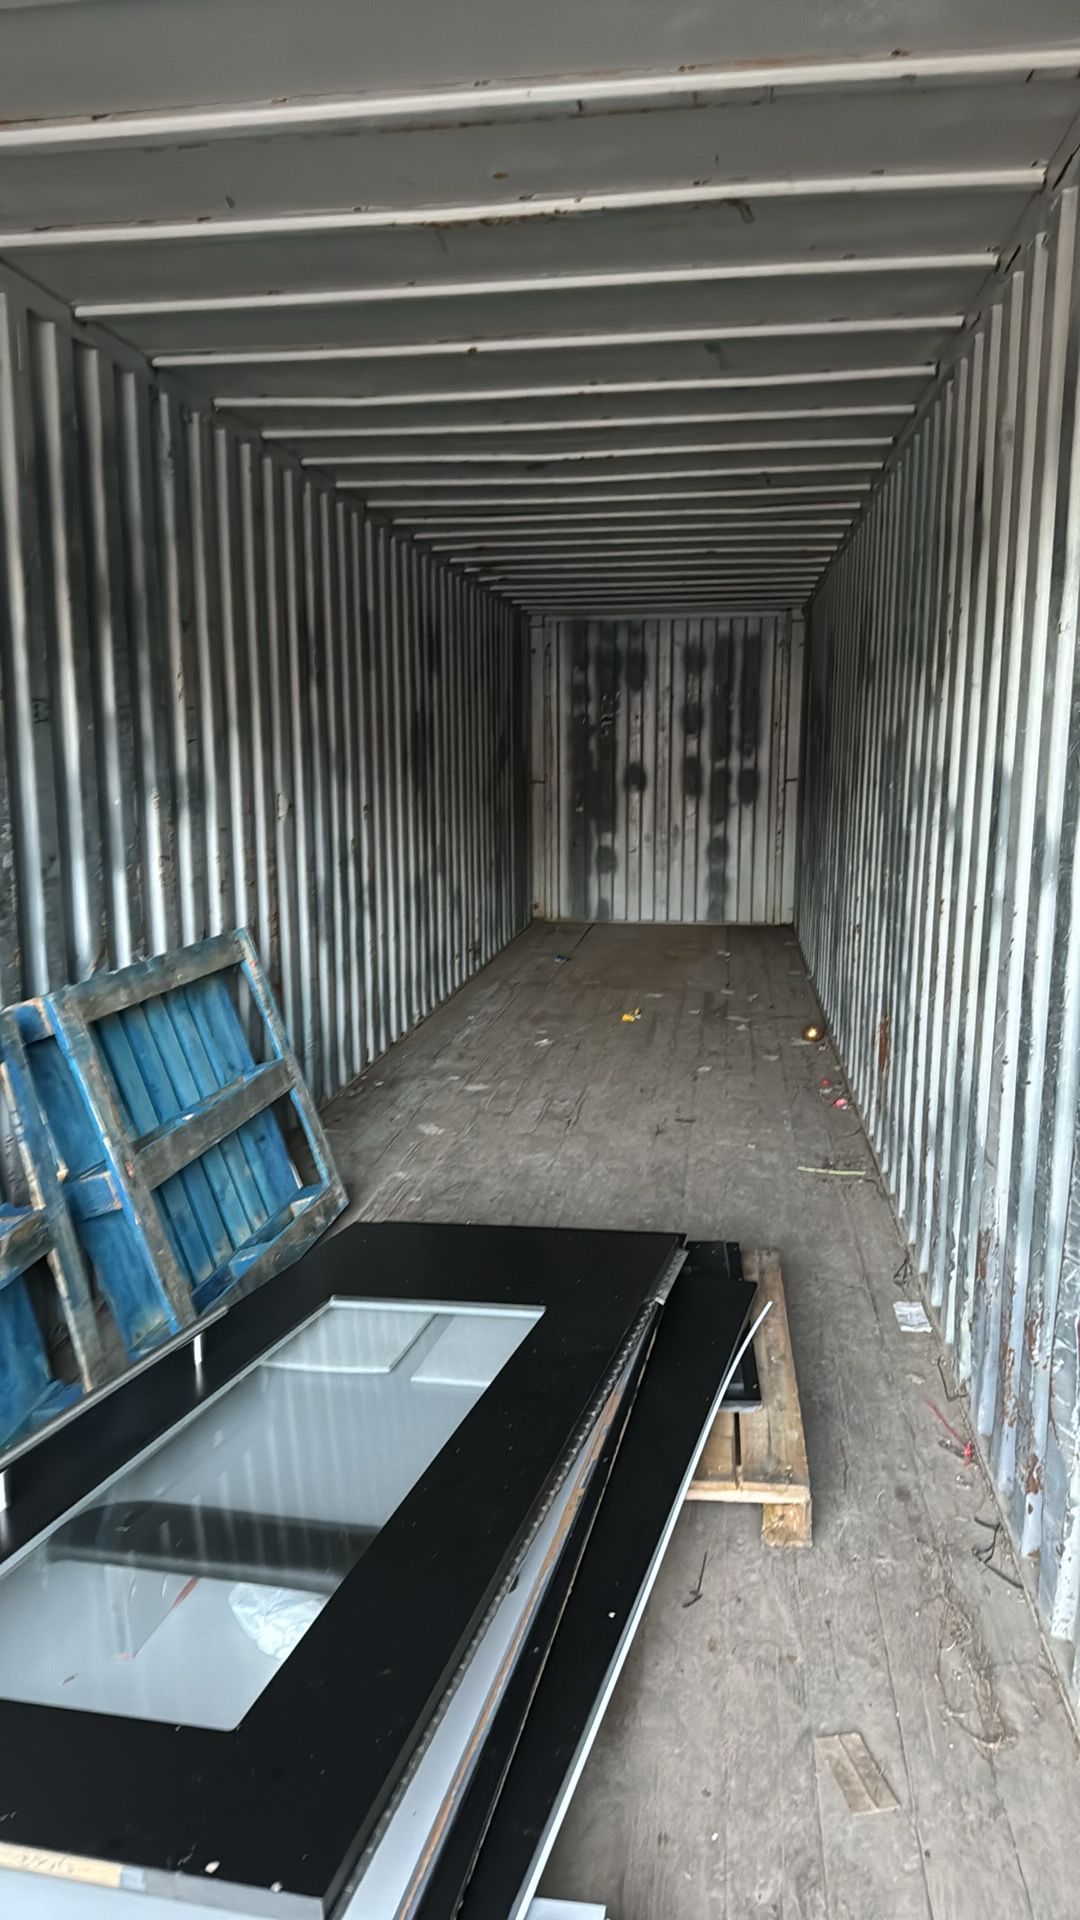 Shipping Container 3 - 6012232 - Image 2 of 3